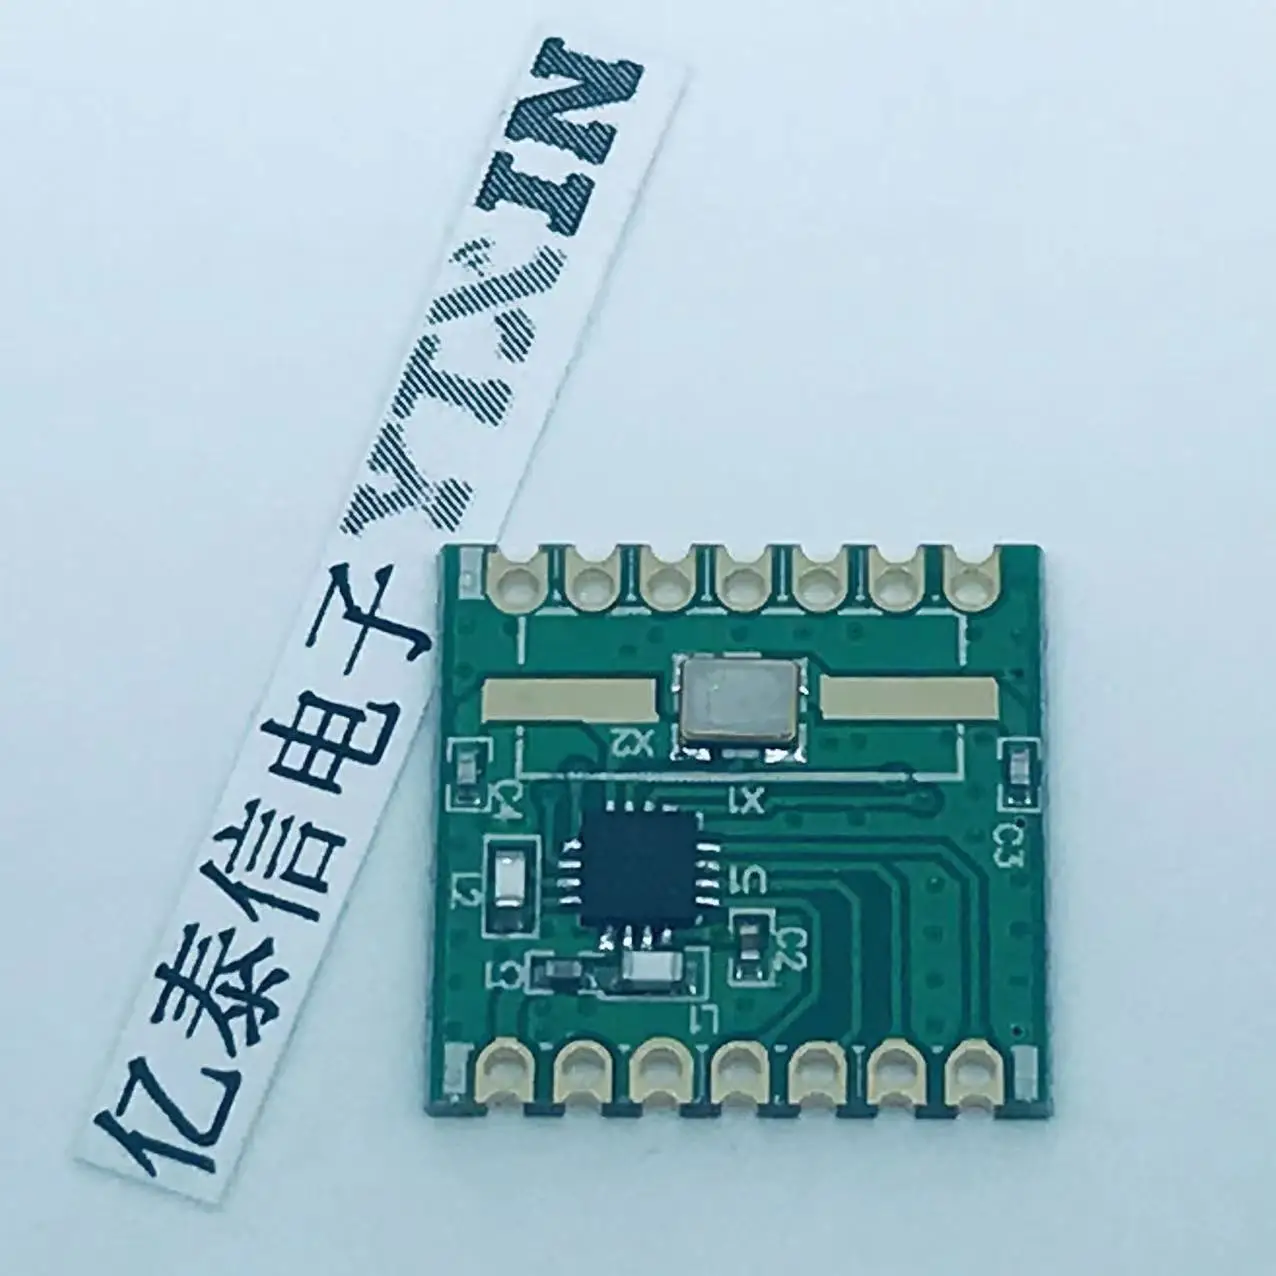 

YTX219S Sub 1GHz receiving module 315/433/868/915Mhz YTX2219A Ultra low power high performance (G)FSK/OOK single receiving LORA